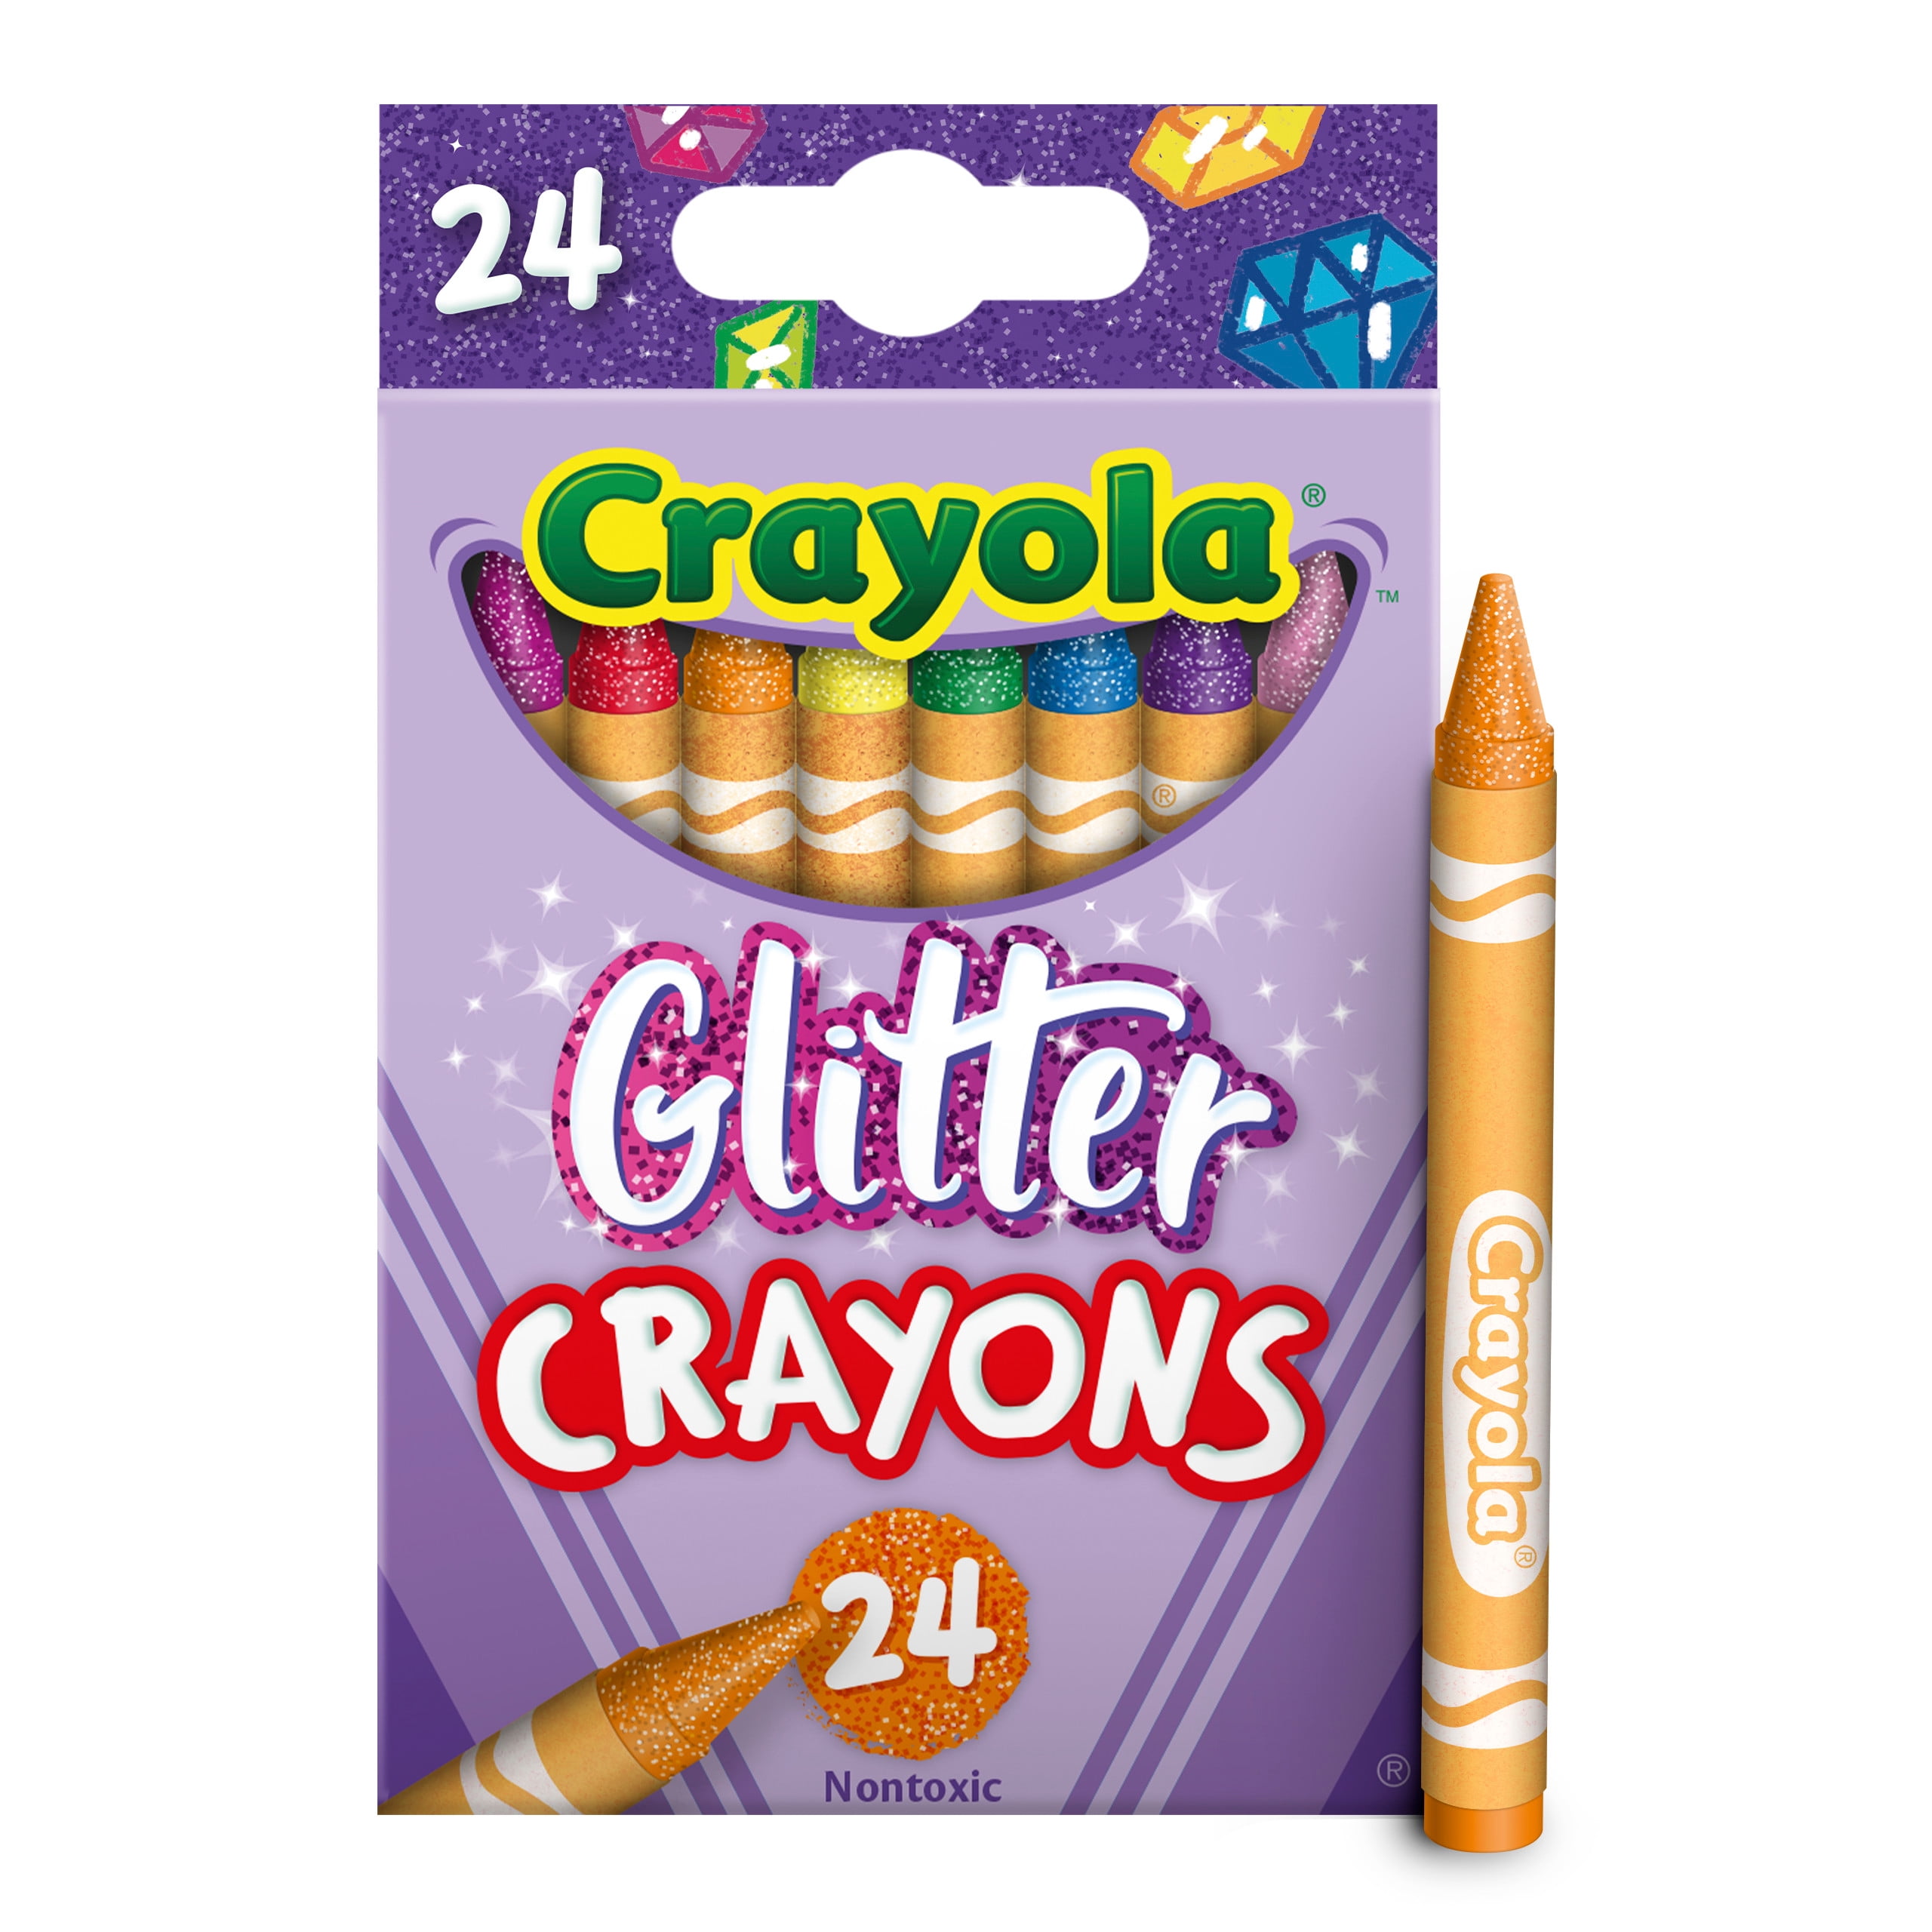 CRAYOLA 8 COUNT LARGE CRAYONS NON - TOXIC SCHOOL COLORING ART NEW